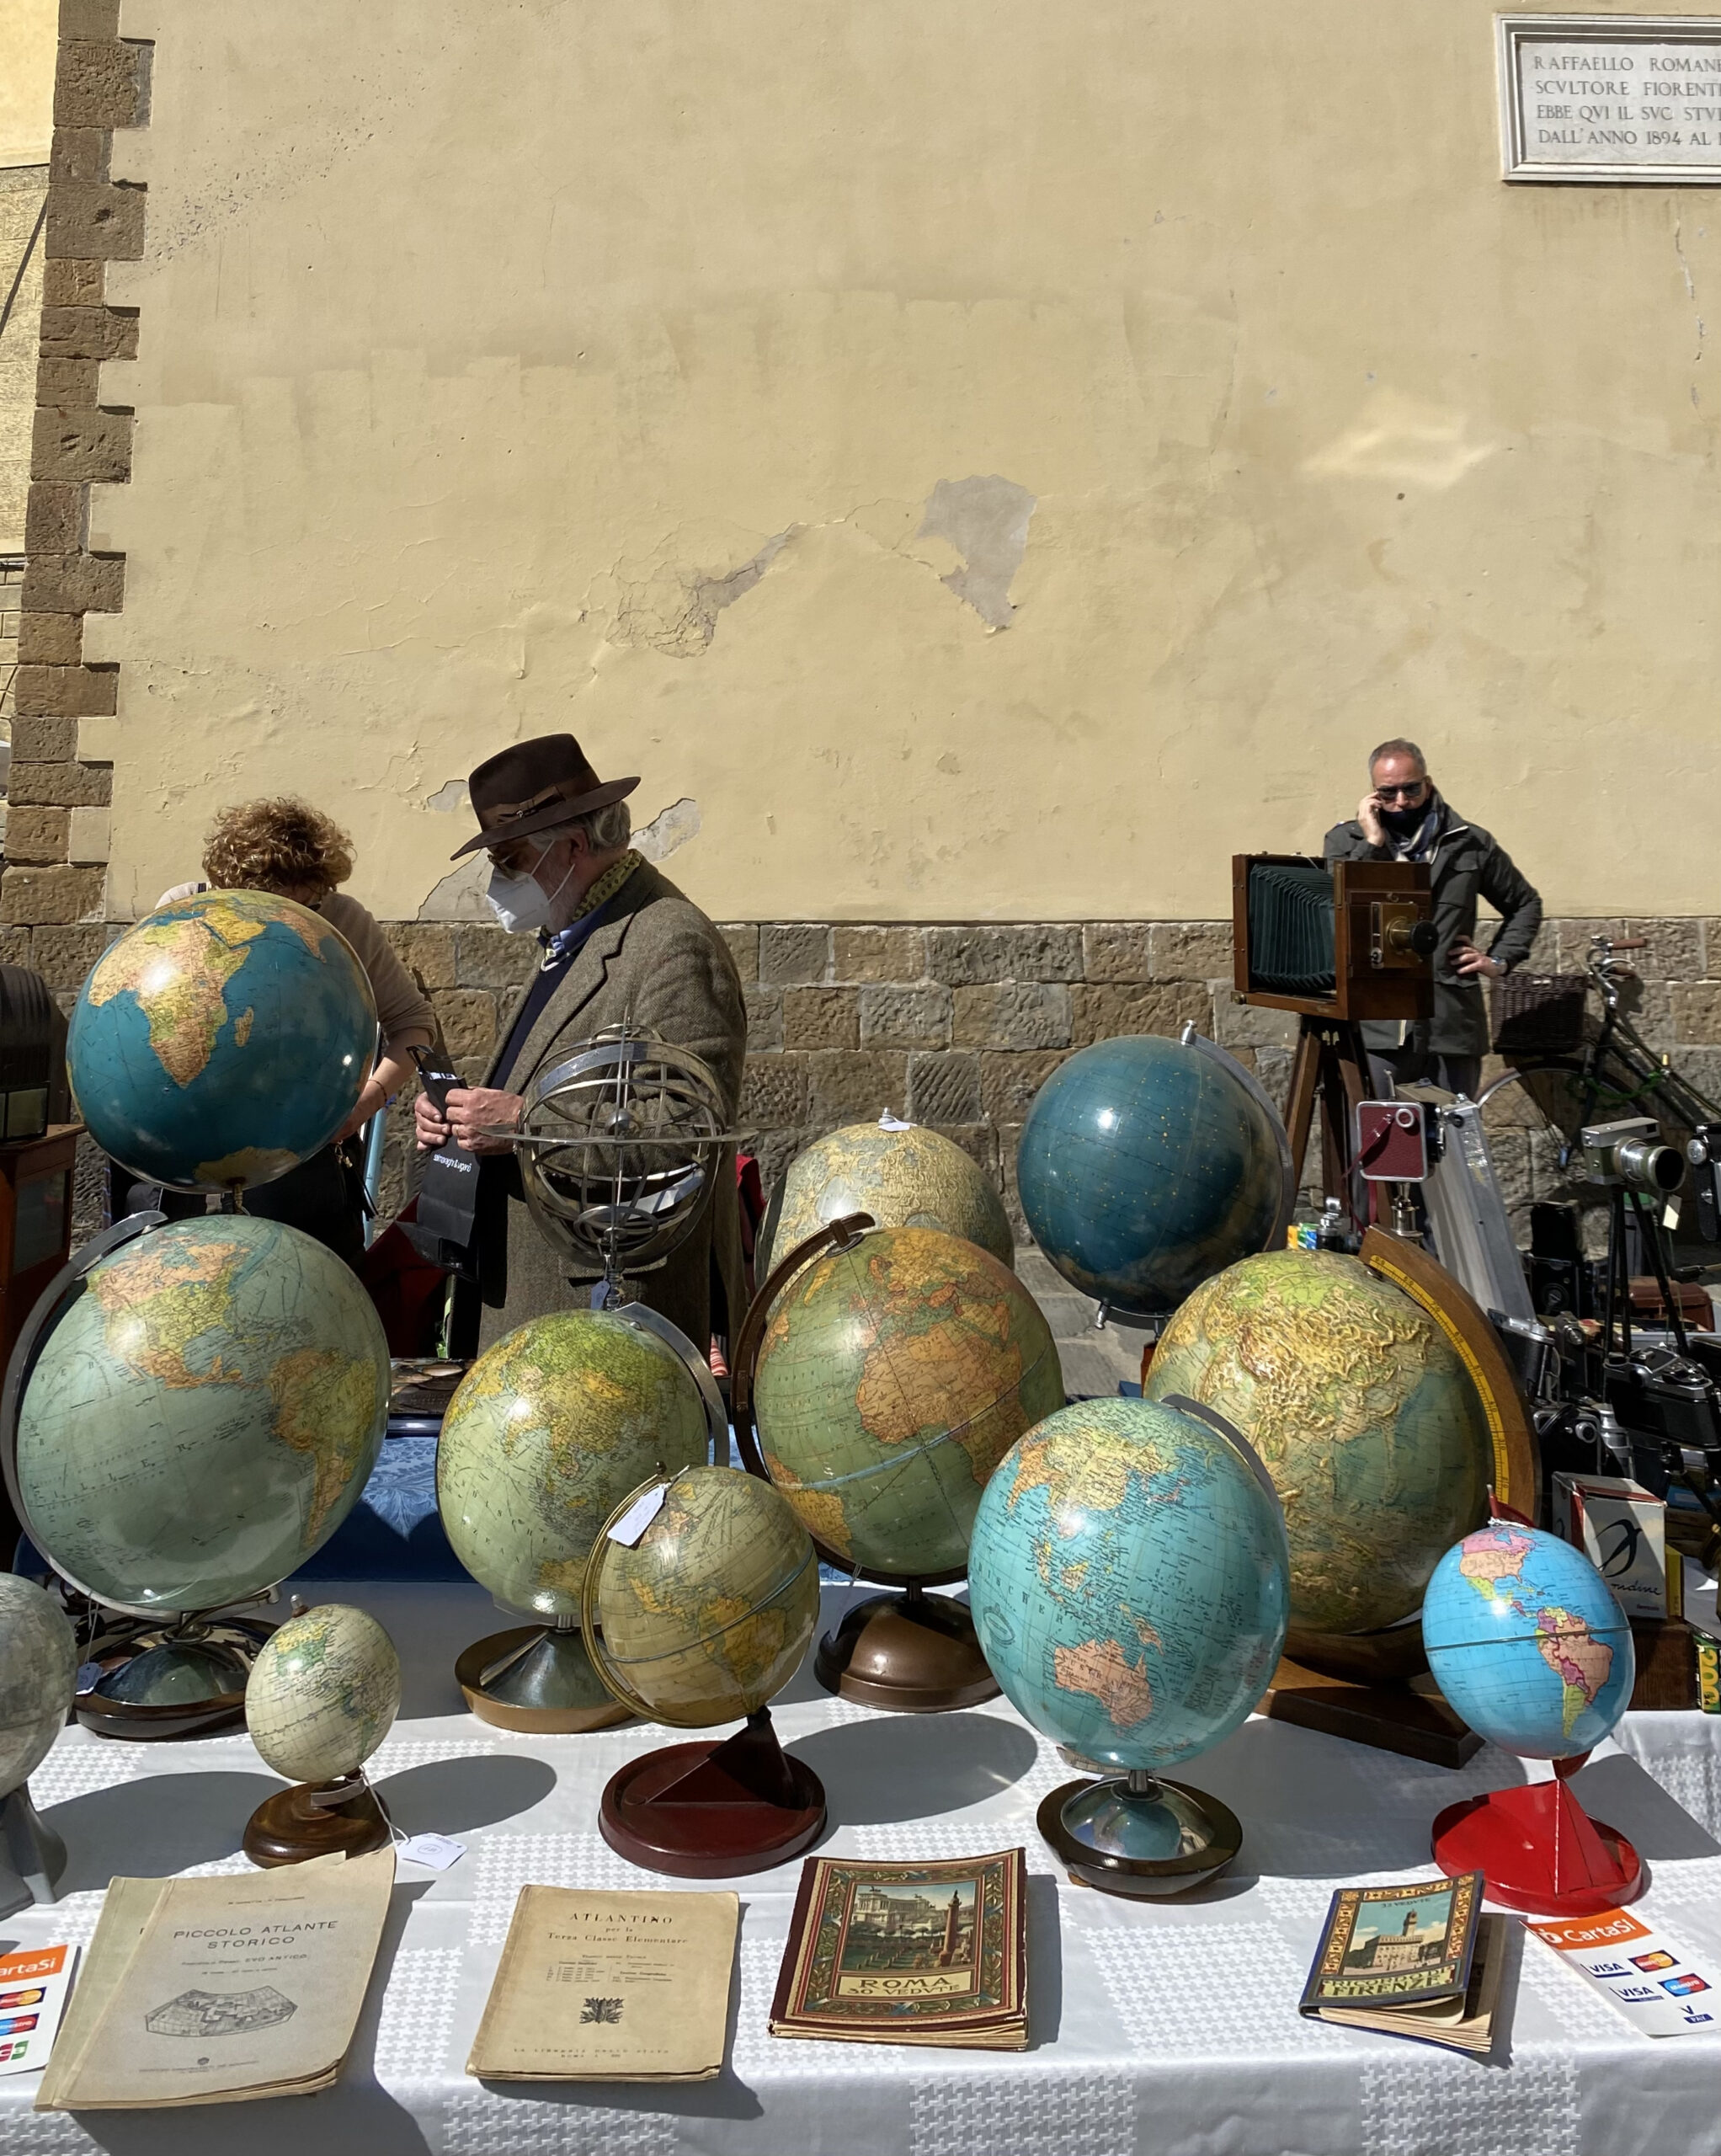 Open-air market stall with globes and antique books, with an artist and shoppers wearing COVID masks in background